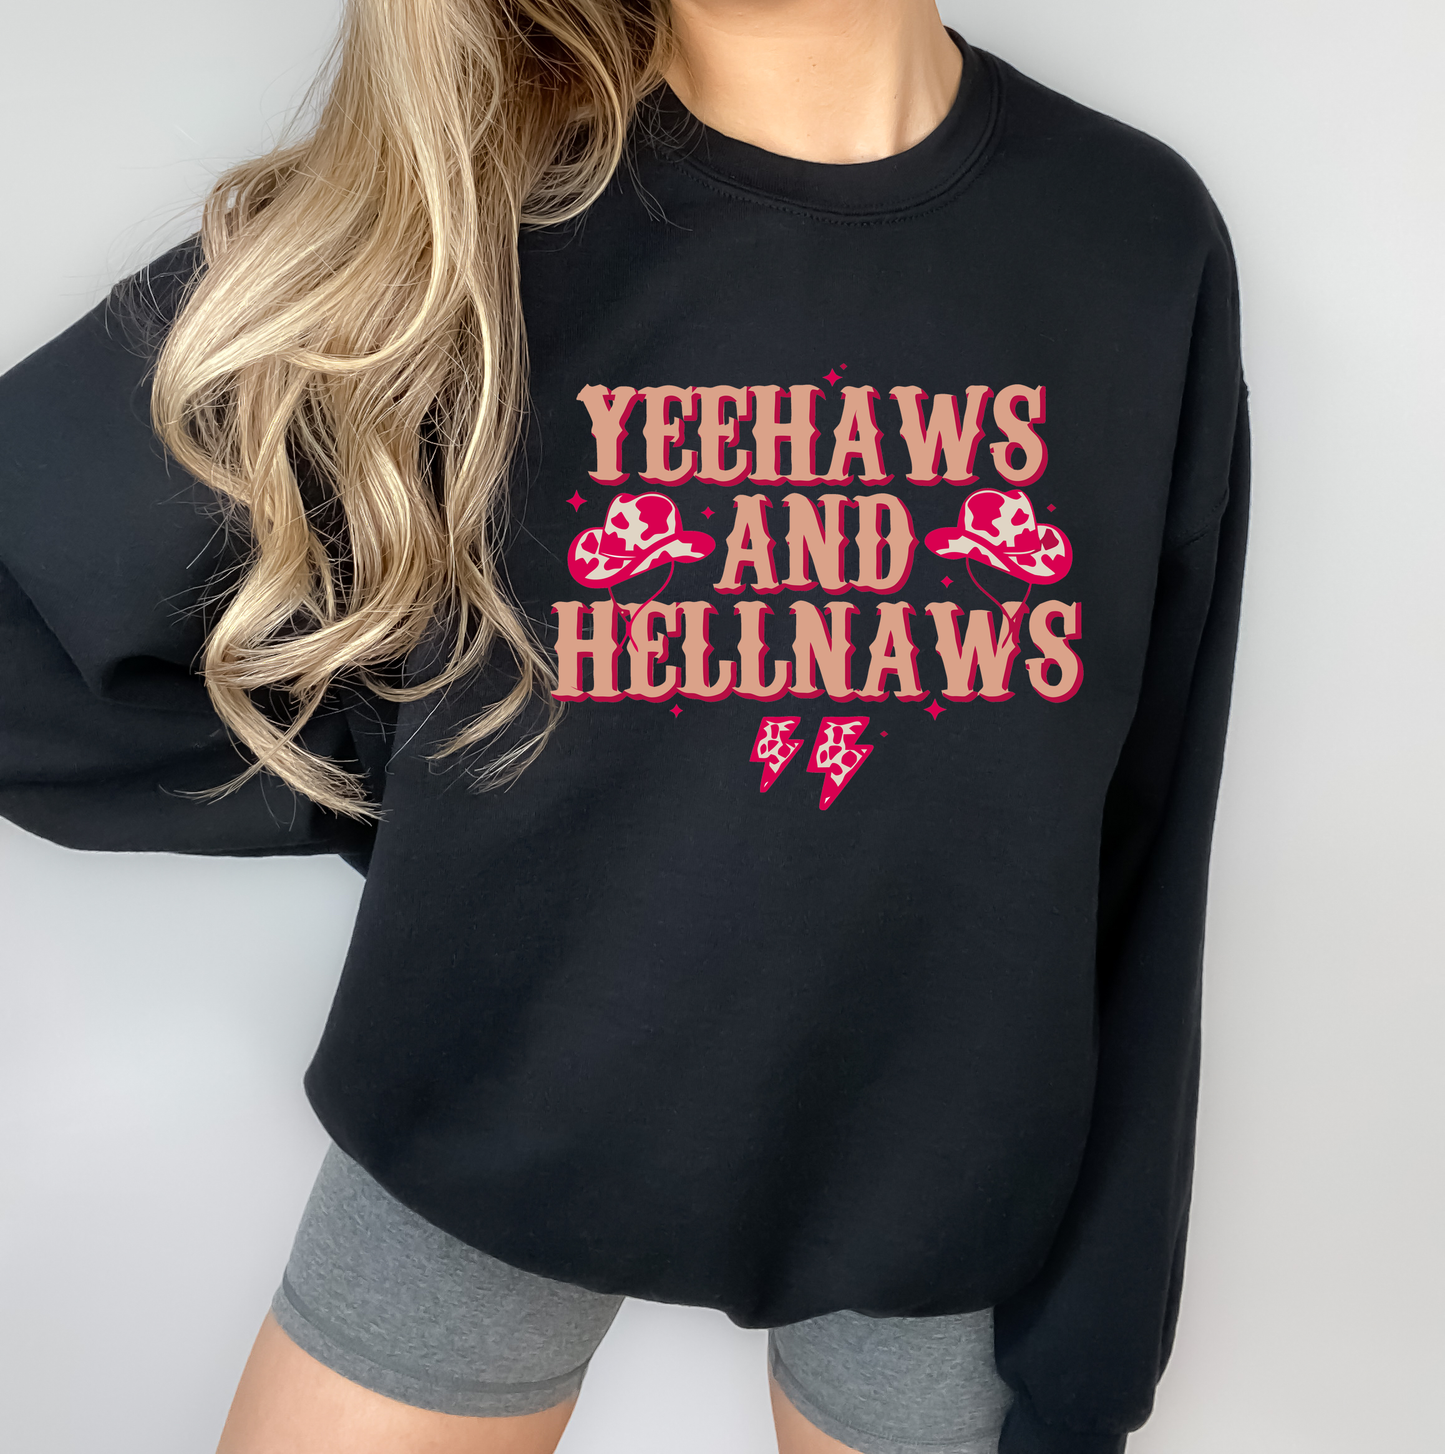 Yeehaw and Hellnaws  - Full Color Heat Transfer